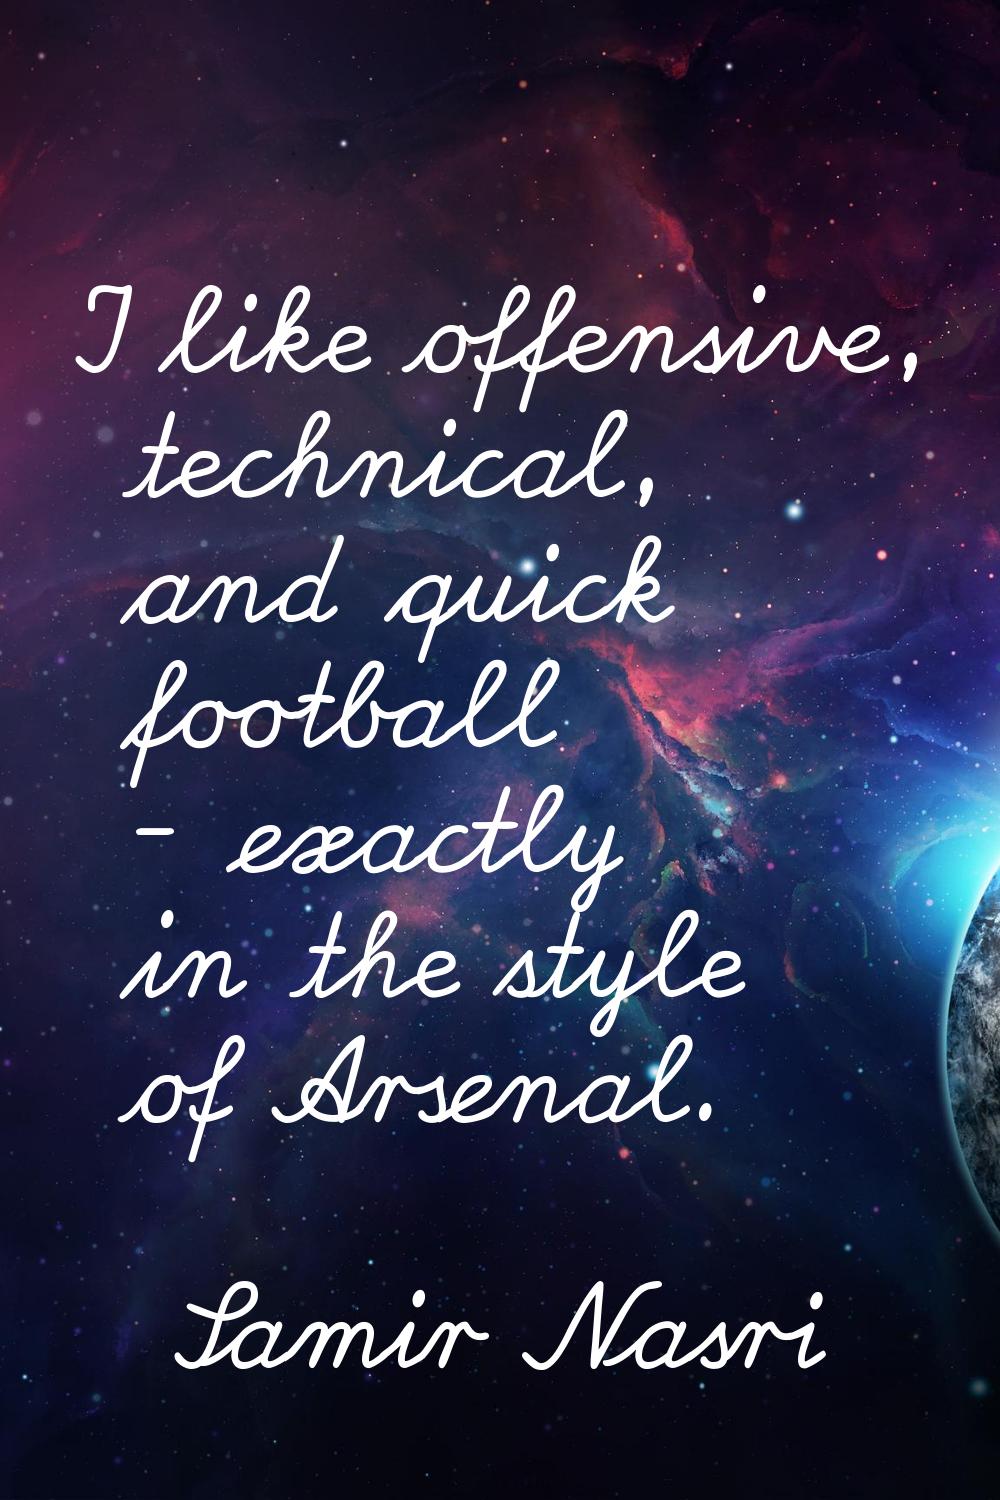 I like offensive, technical, and quick football - exactly in the style of Arsenal.